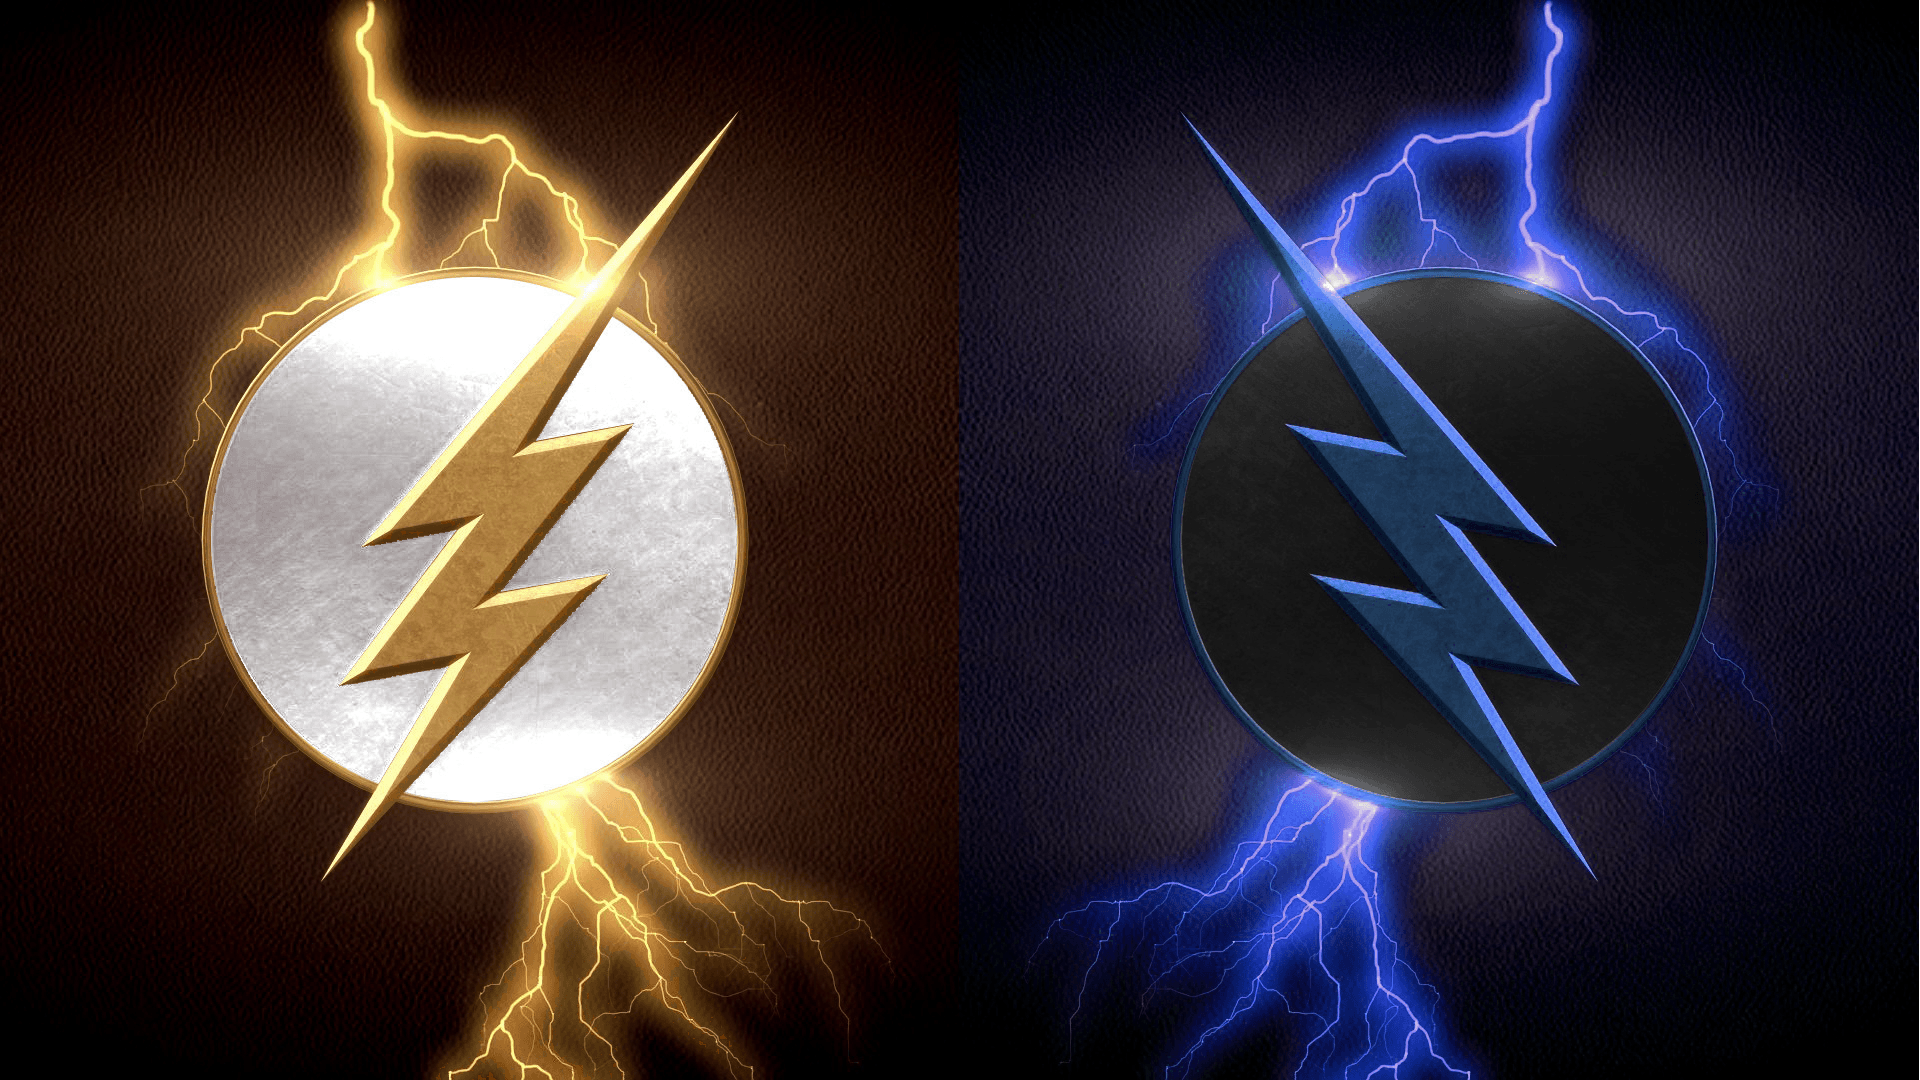 Zoom The Flash Wallpaper. The Flash. Flash